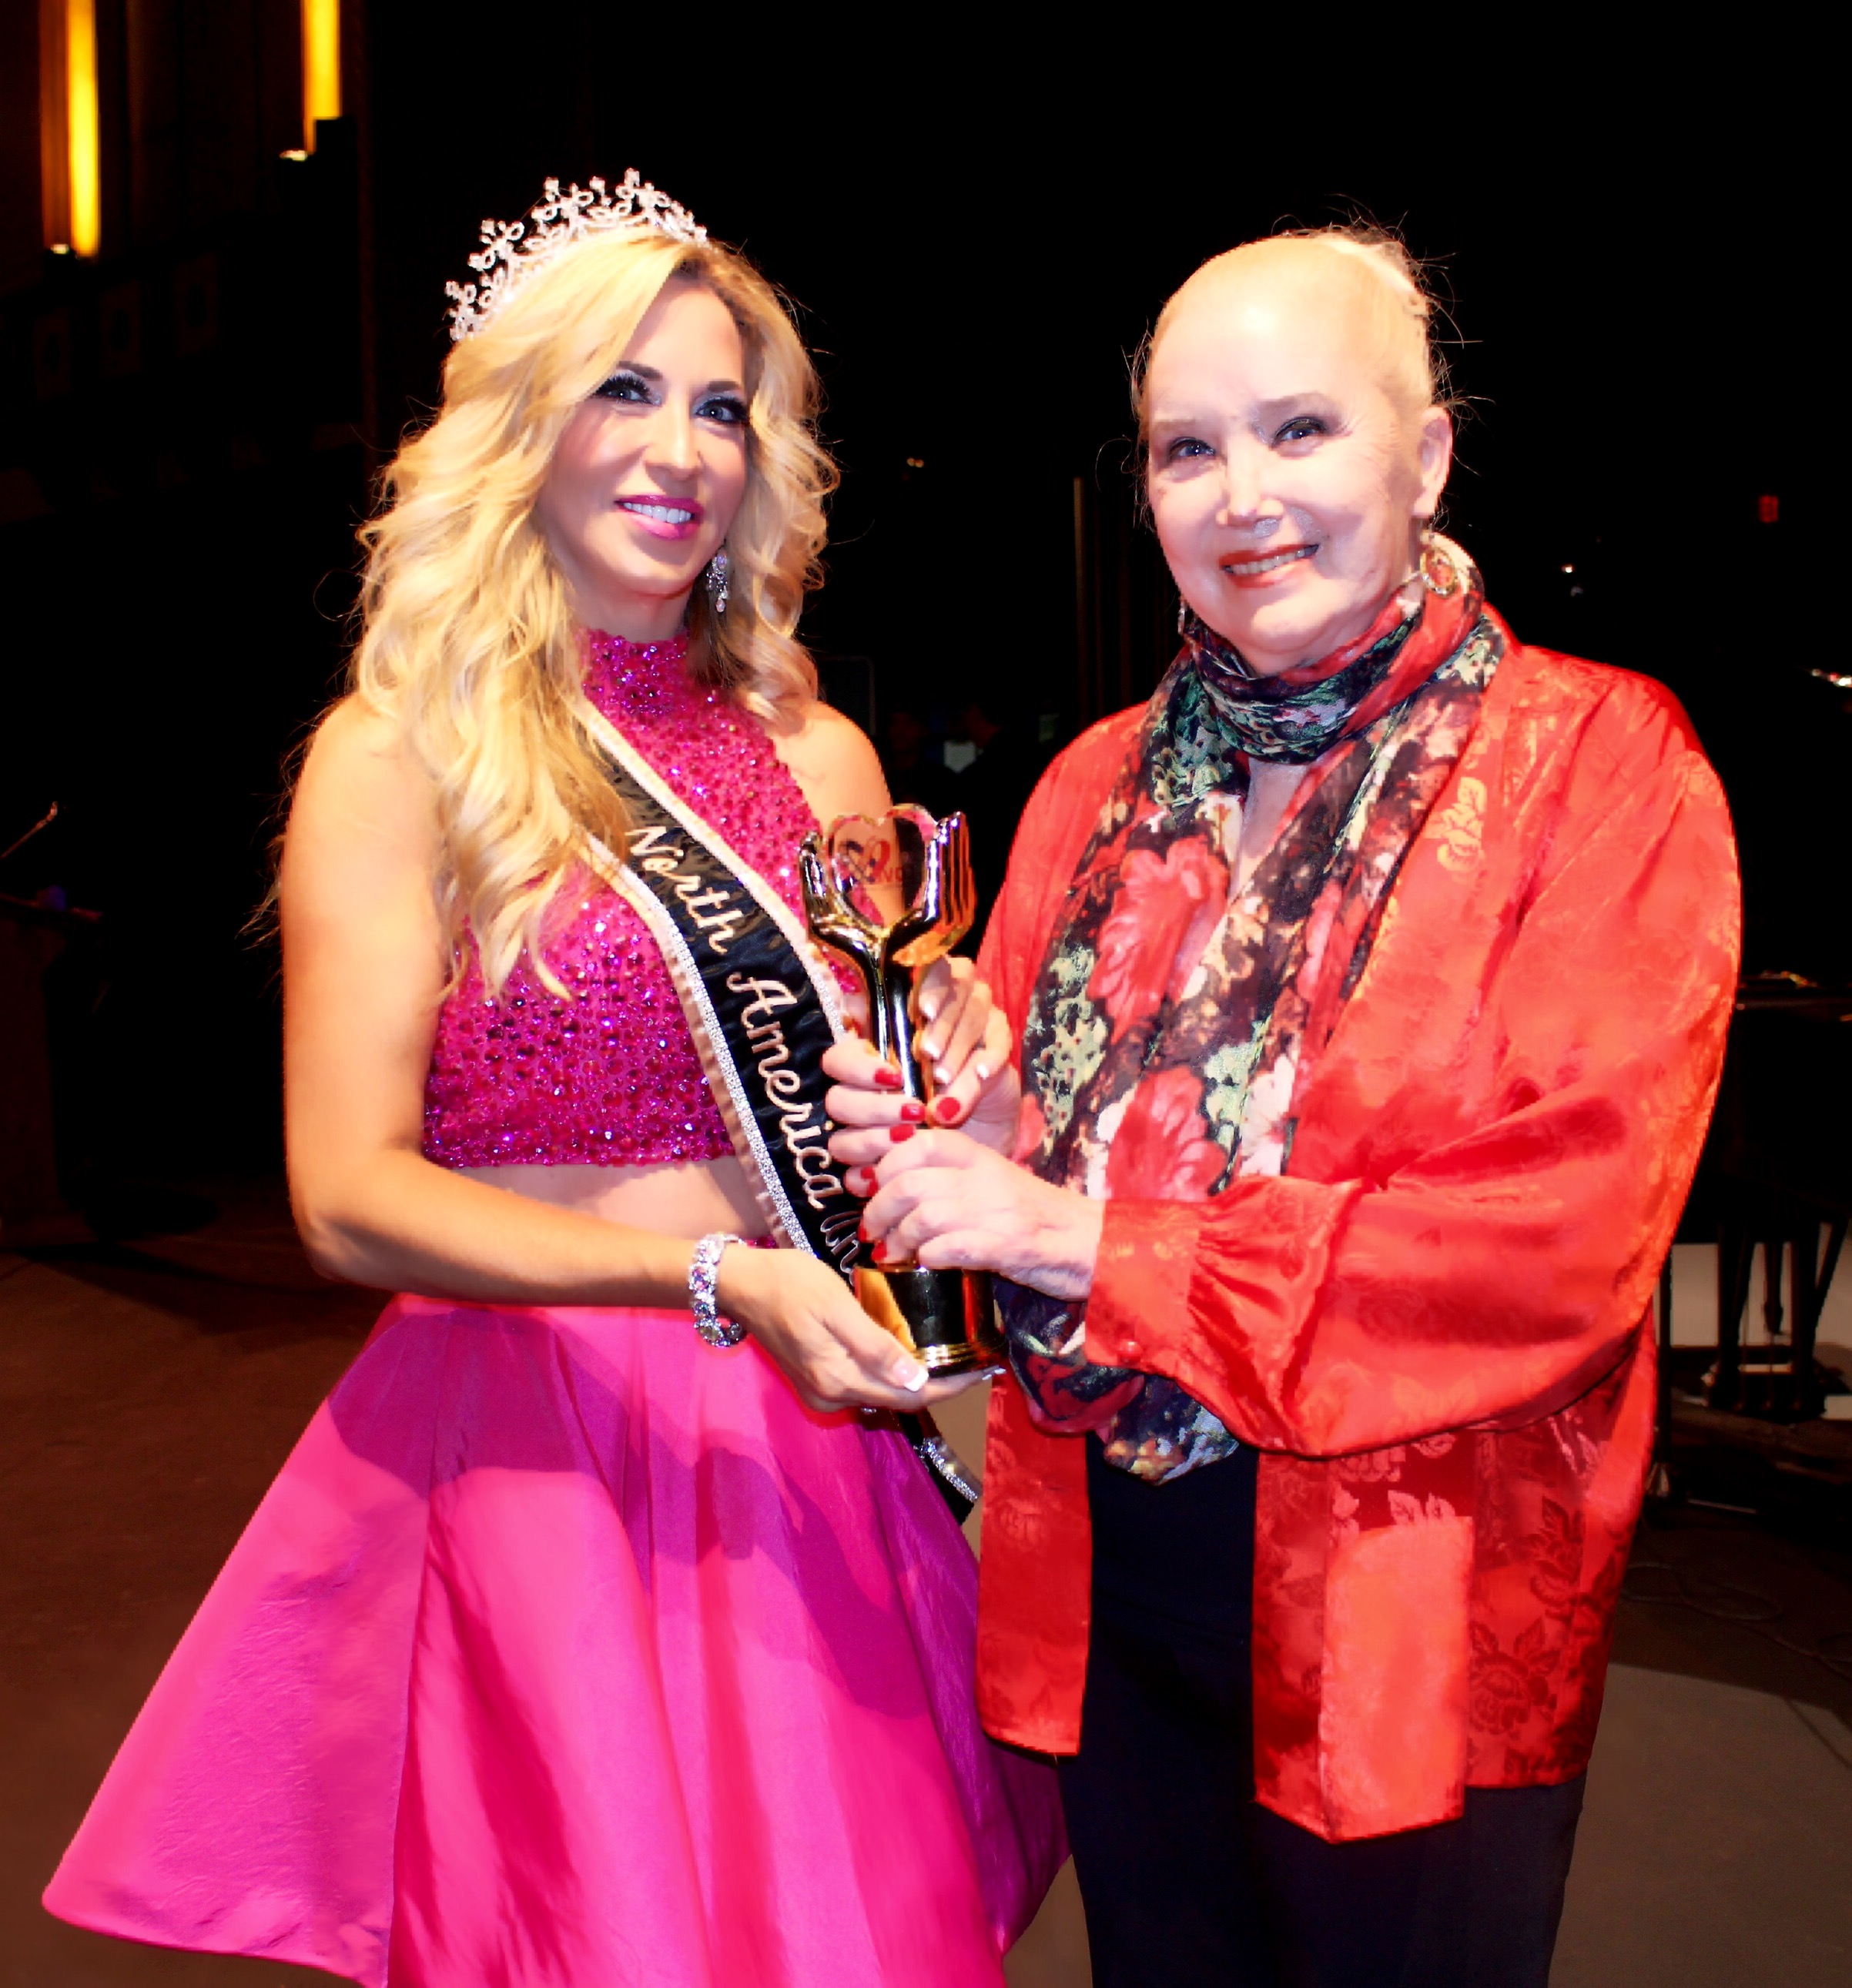 Carla Gonzalez, Ms. North America Universe 2016 was invited by The Love International Film Festival to present Golden Globe winner and iconic actress Sally Kirkland with the Humanitarian Award